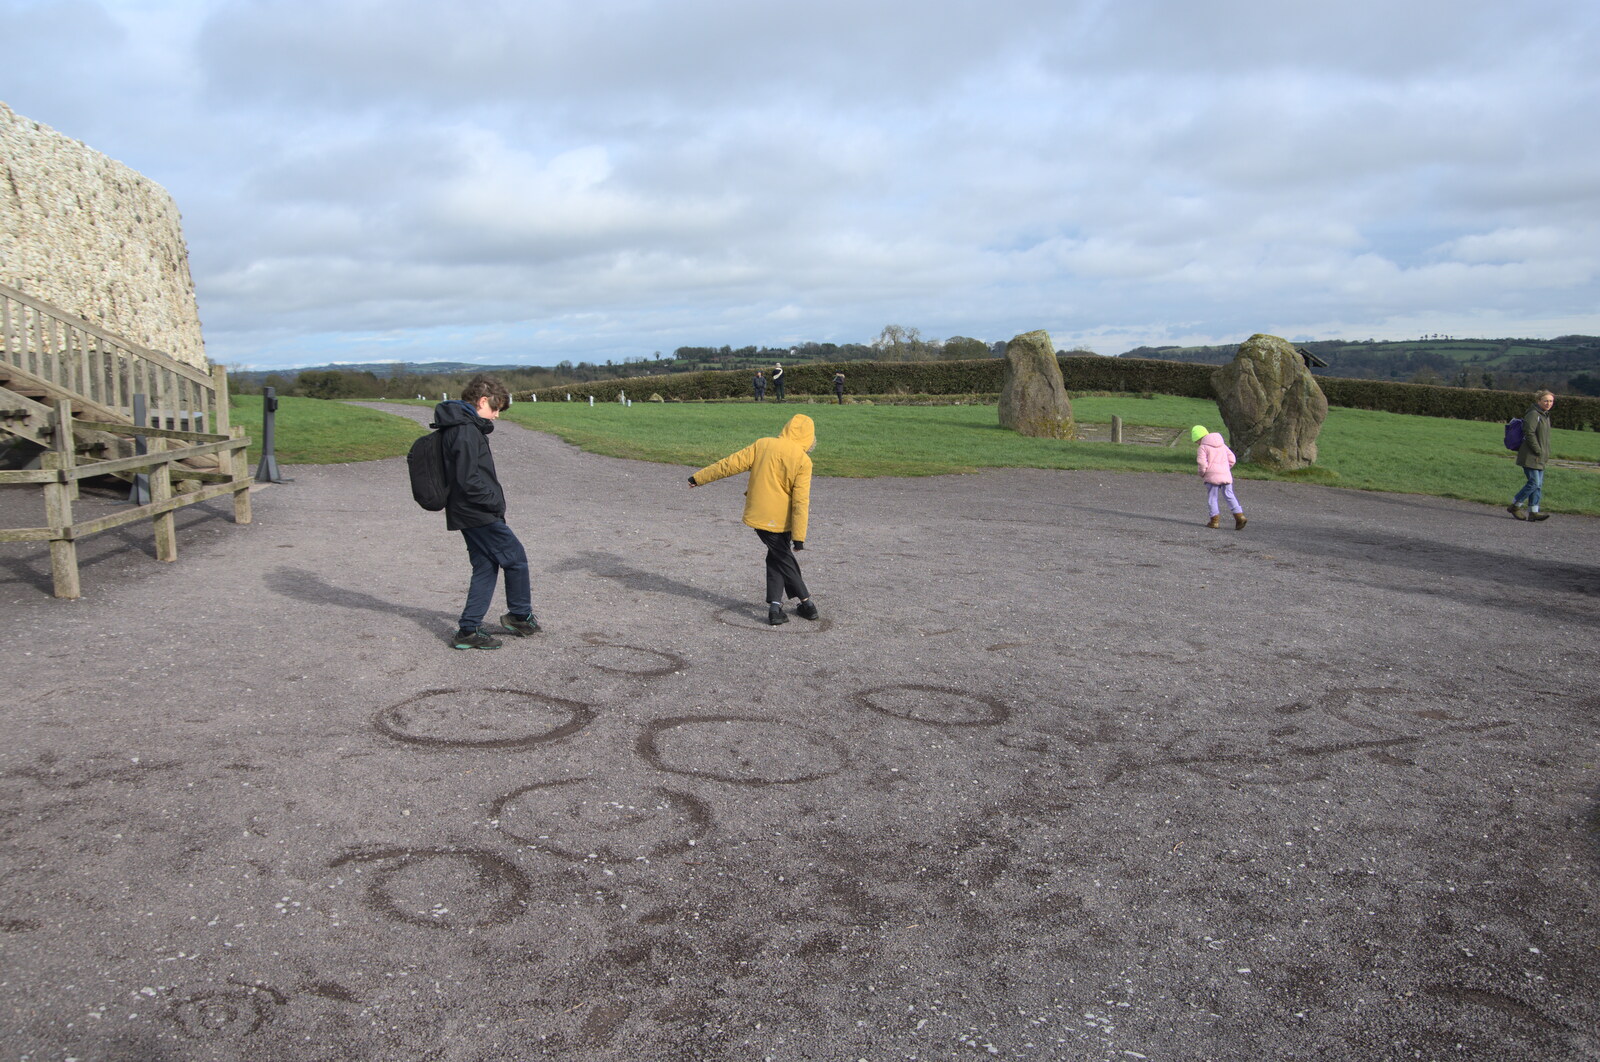 Blackrock North and Newgrange, County Louth, Ireland - 16th February 2023: Fred and Harry make their own circles